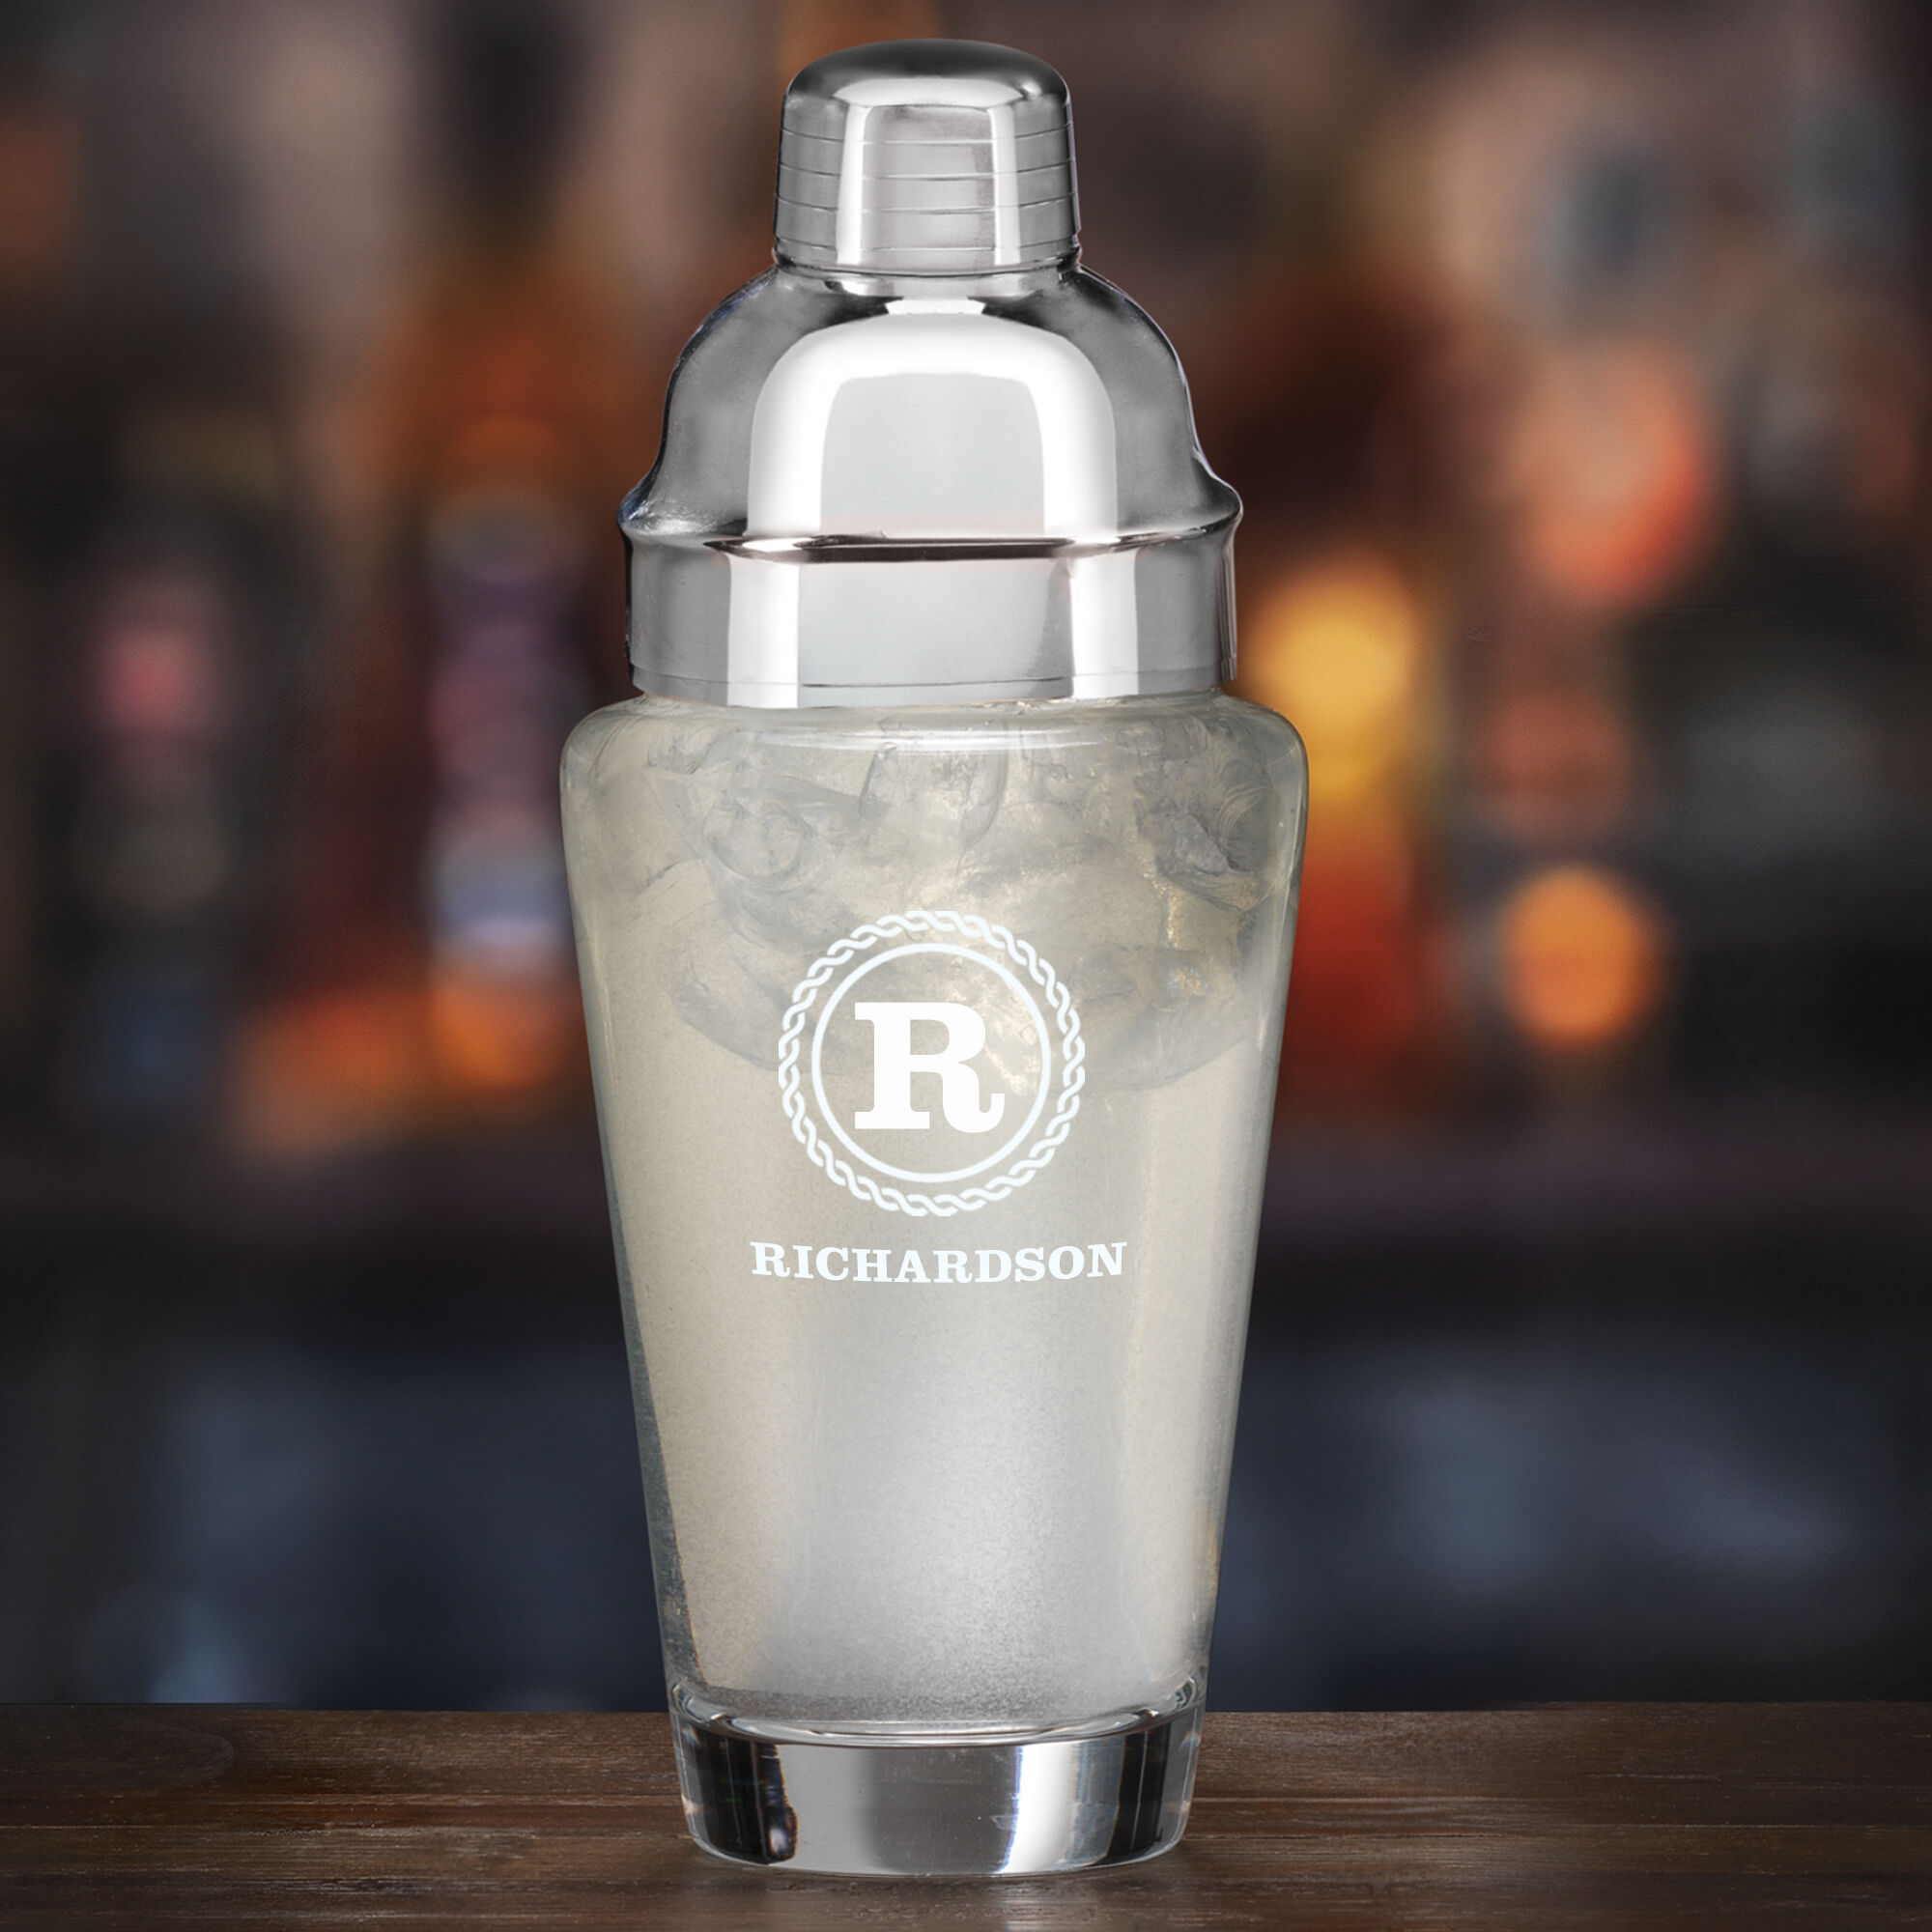 The Personalized Cocktail Shaker 5679 0025 a main